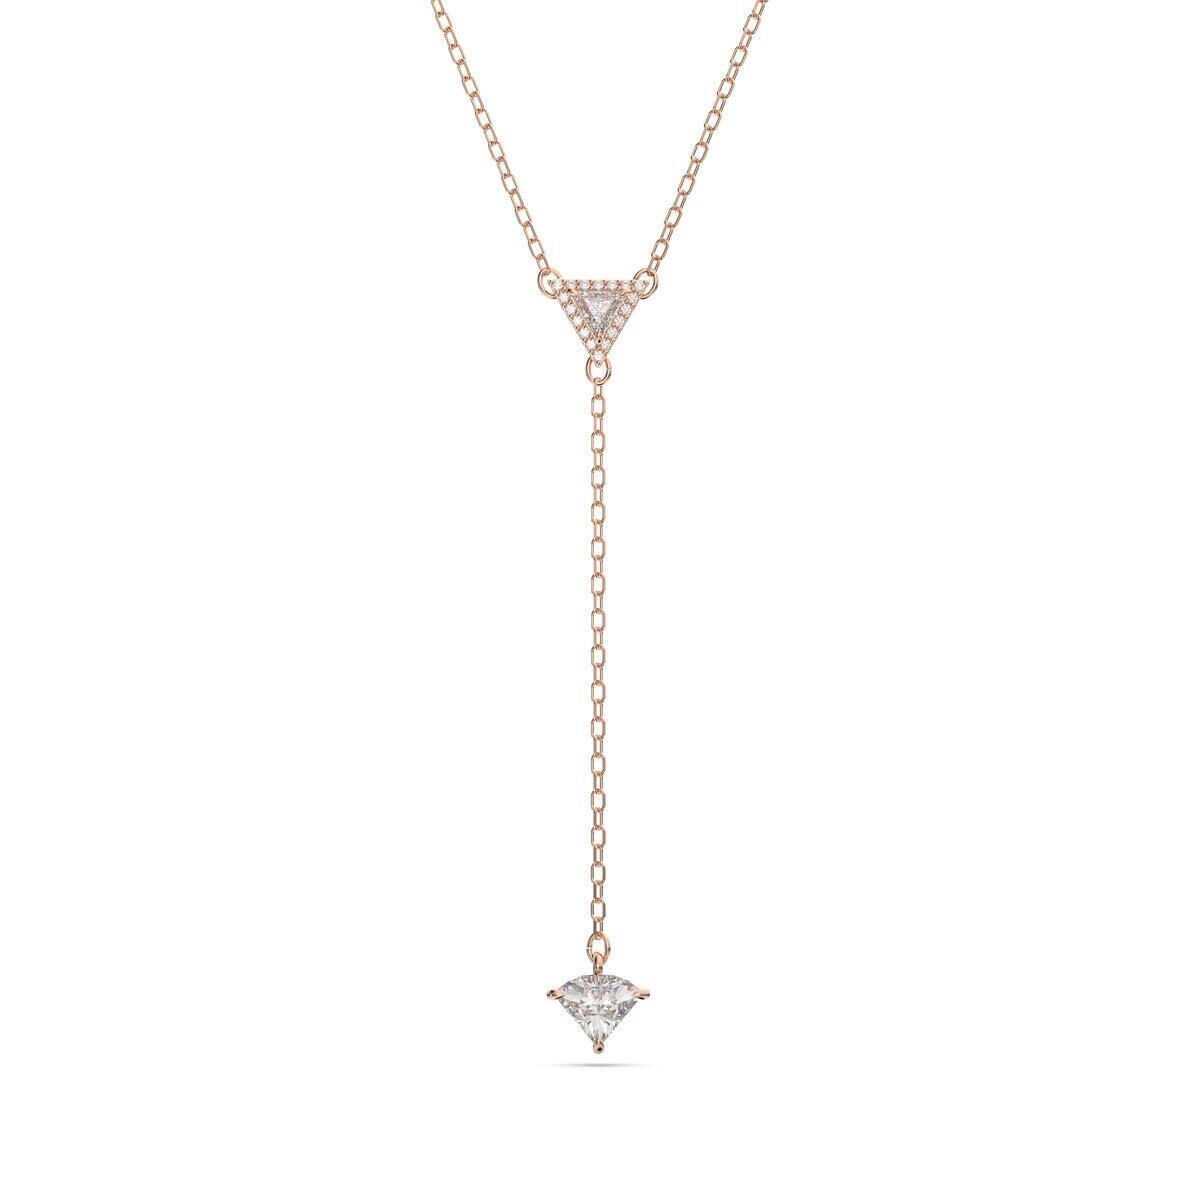 authentic swarovski ortyx lariat necklace in rose gold plating